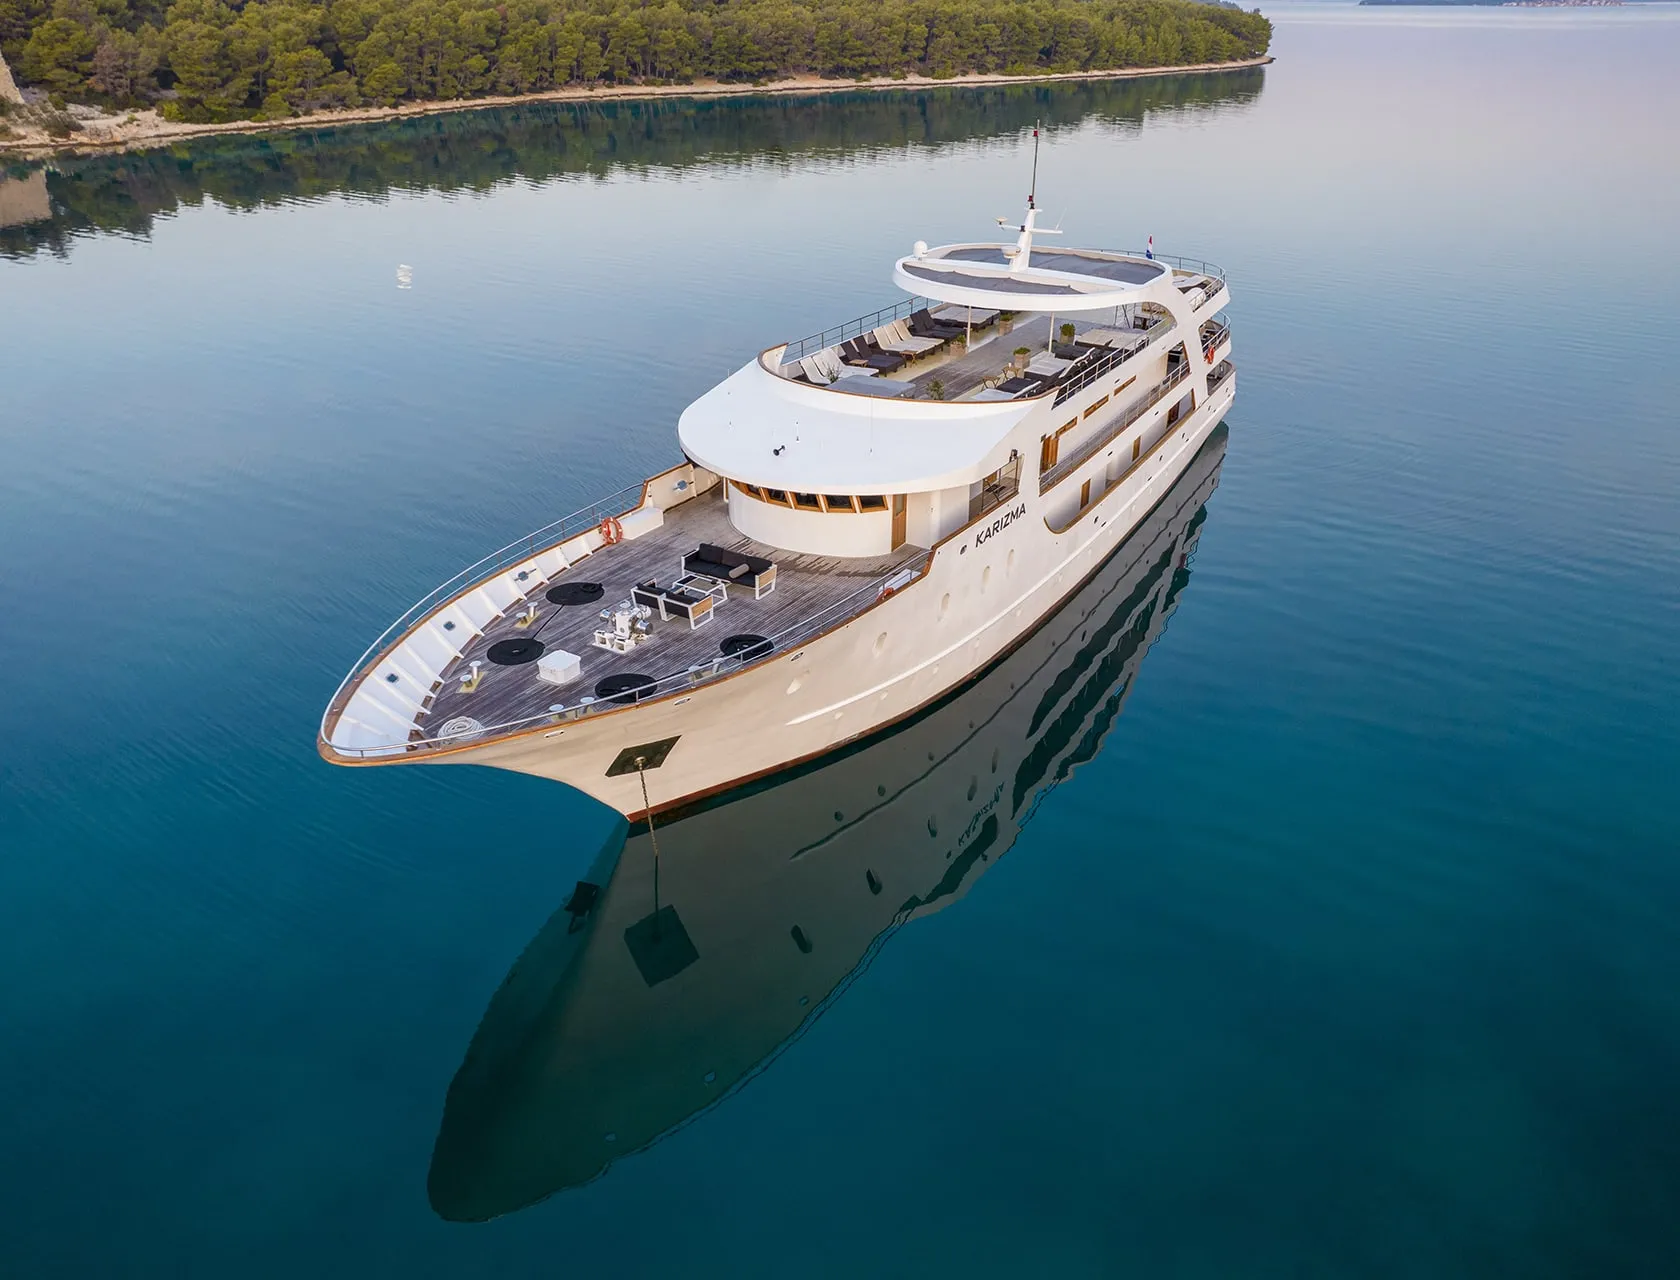 DS Yacht Karizma - the best value for money charter experience